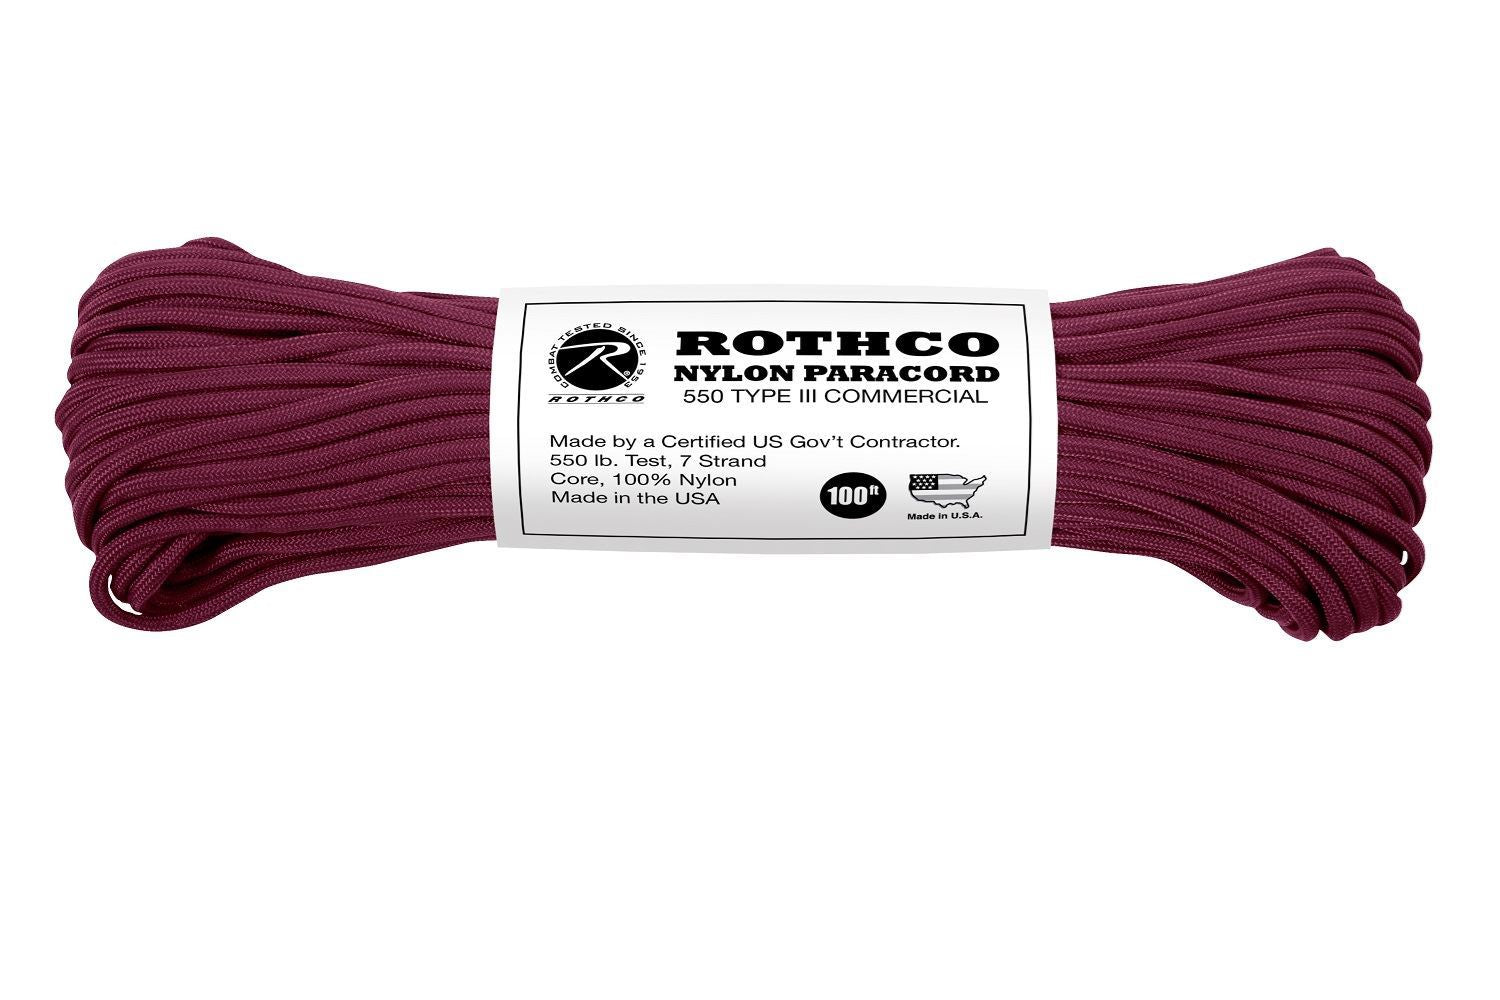 Nylon Paracord Type III 550 LB 100 FT Color : Burgundy (5 per pack)